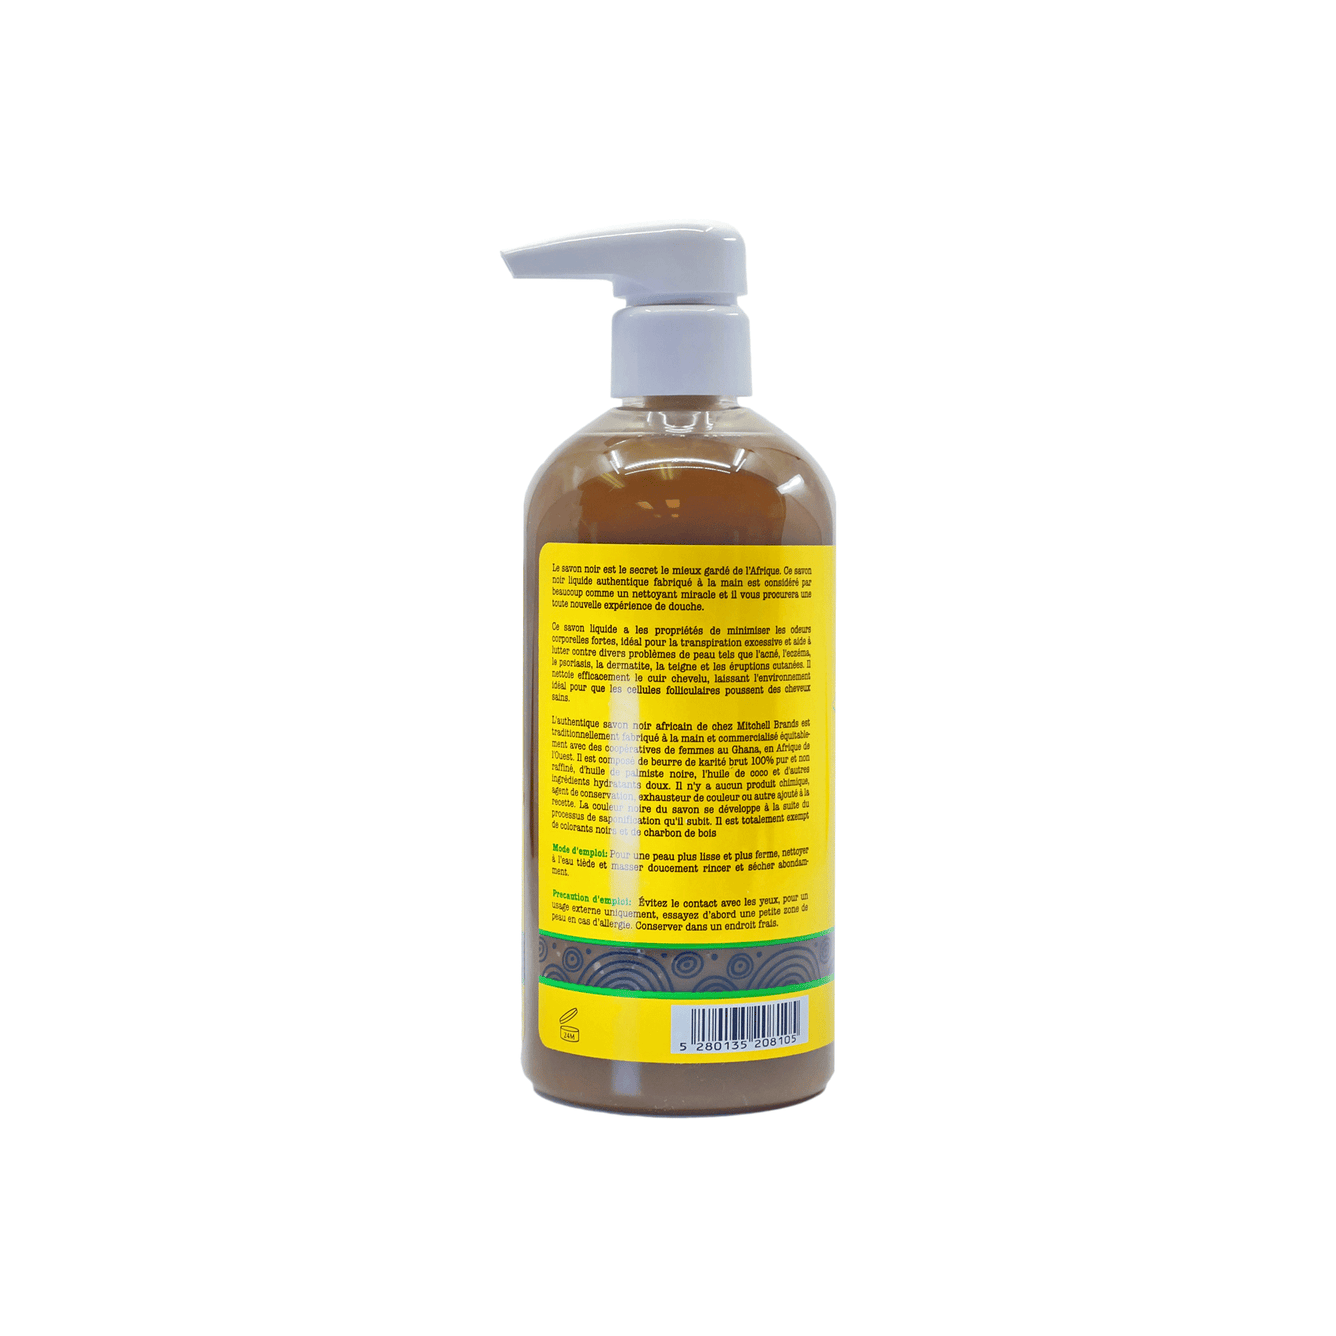 African Liquid Black Soap with Coconut 500 ml (New)